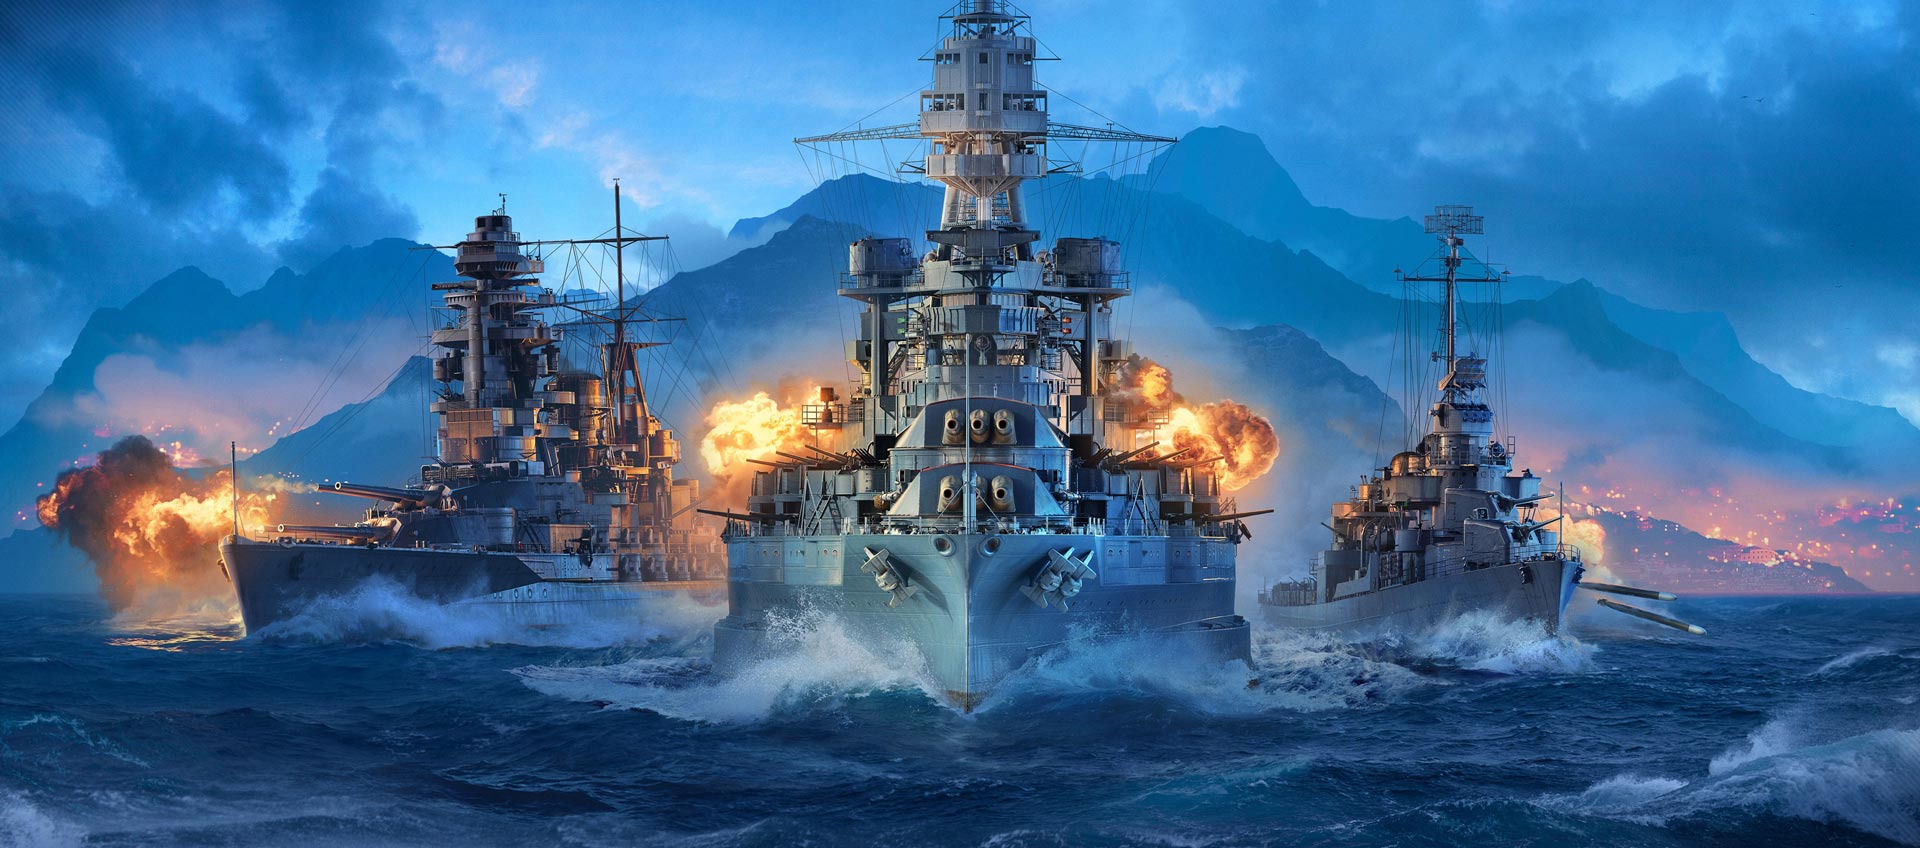 world of warships legends xbox ship diagrams